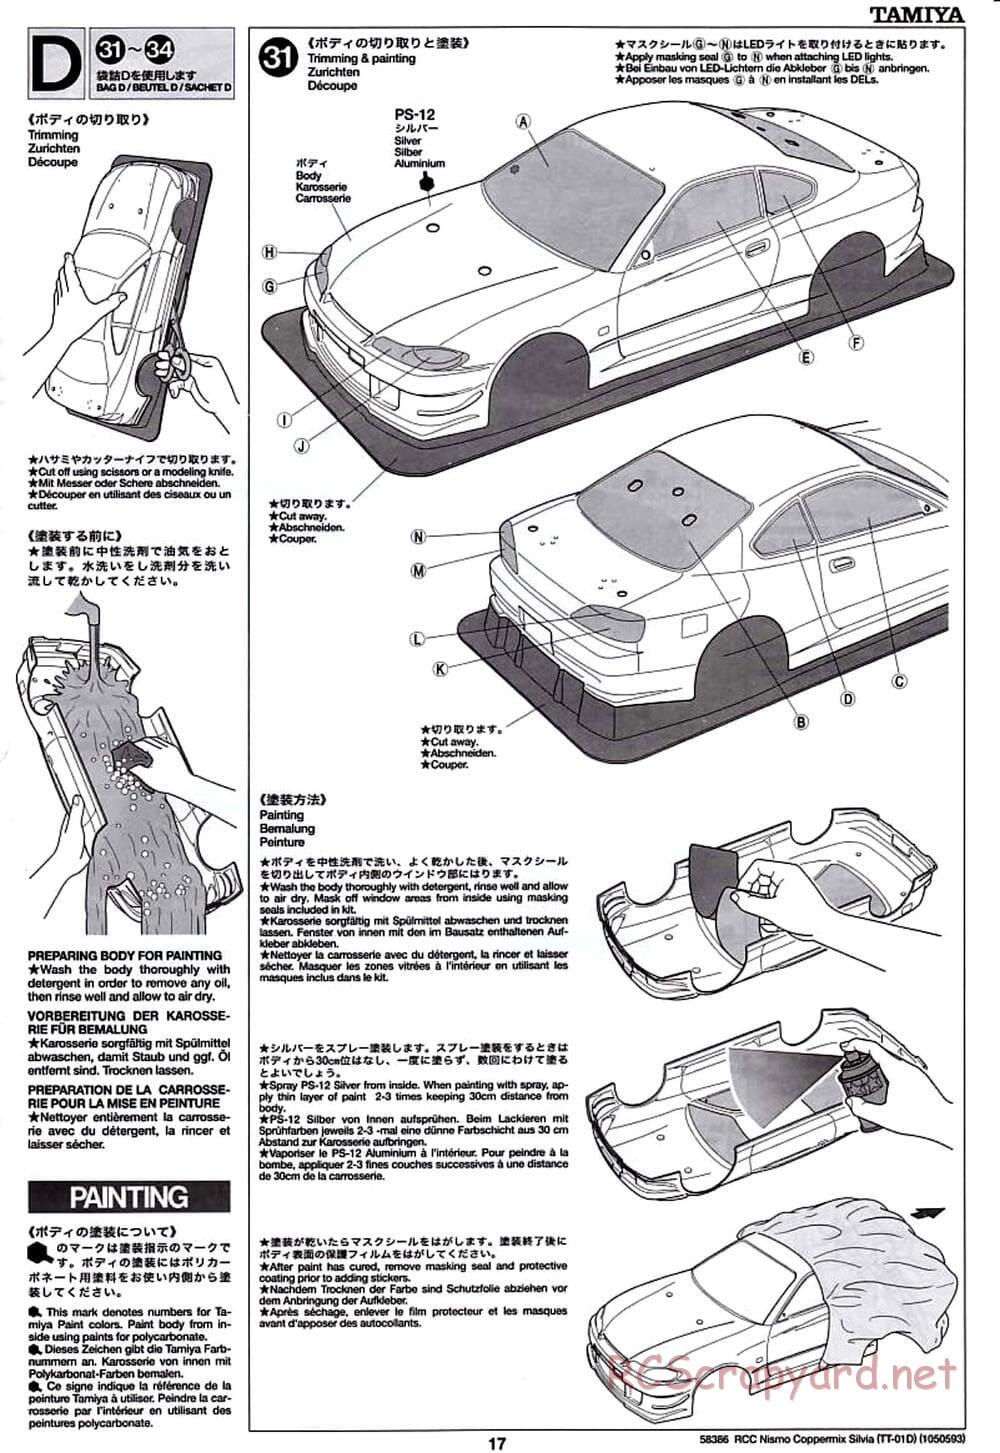 Tamiya - Nismo Coppermix Silvia Drift Spec - TT-01D Chassis - Manual - Page 17